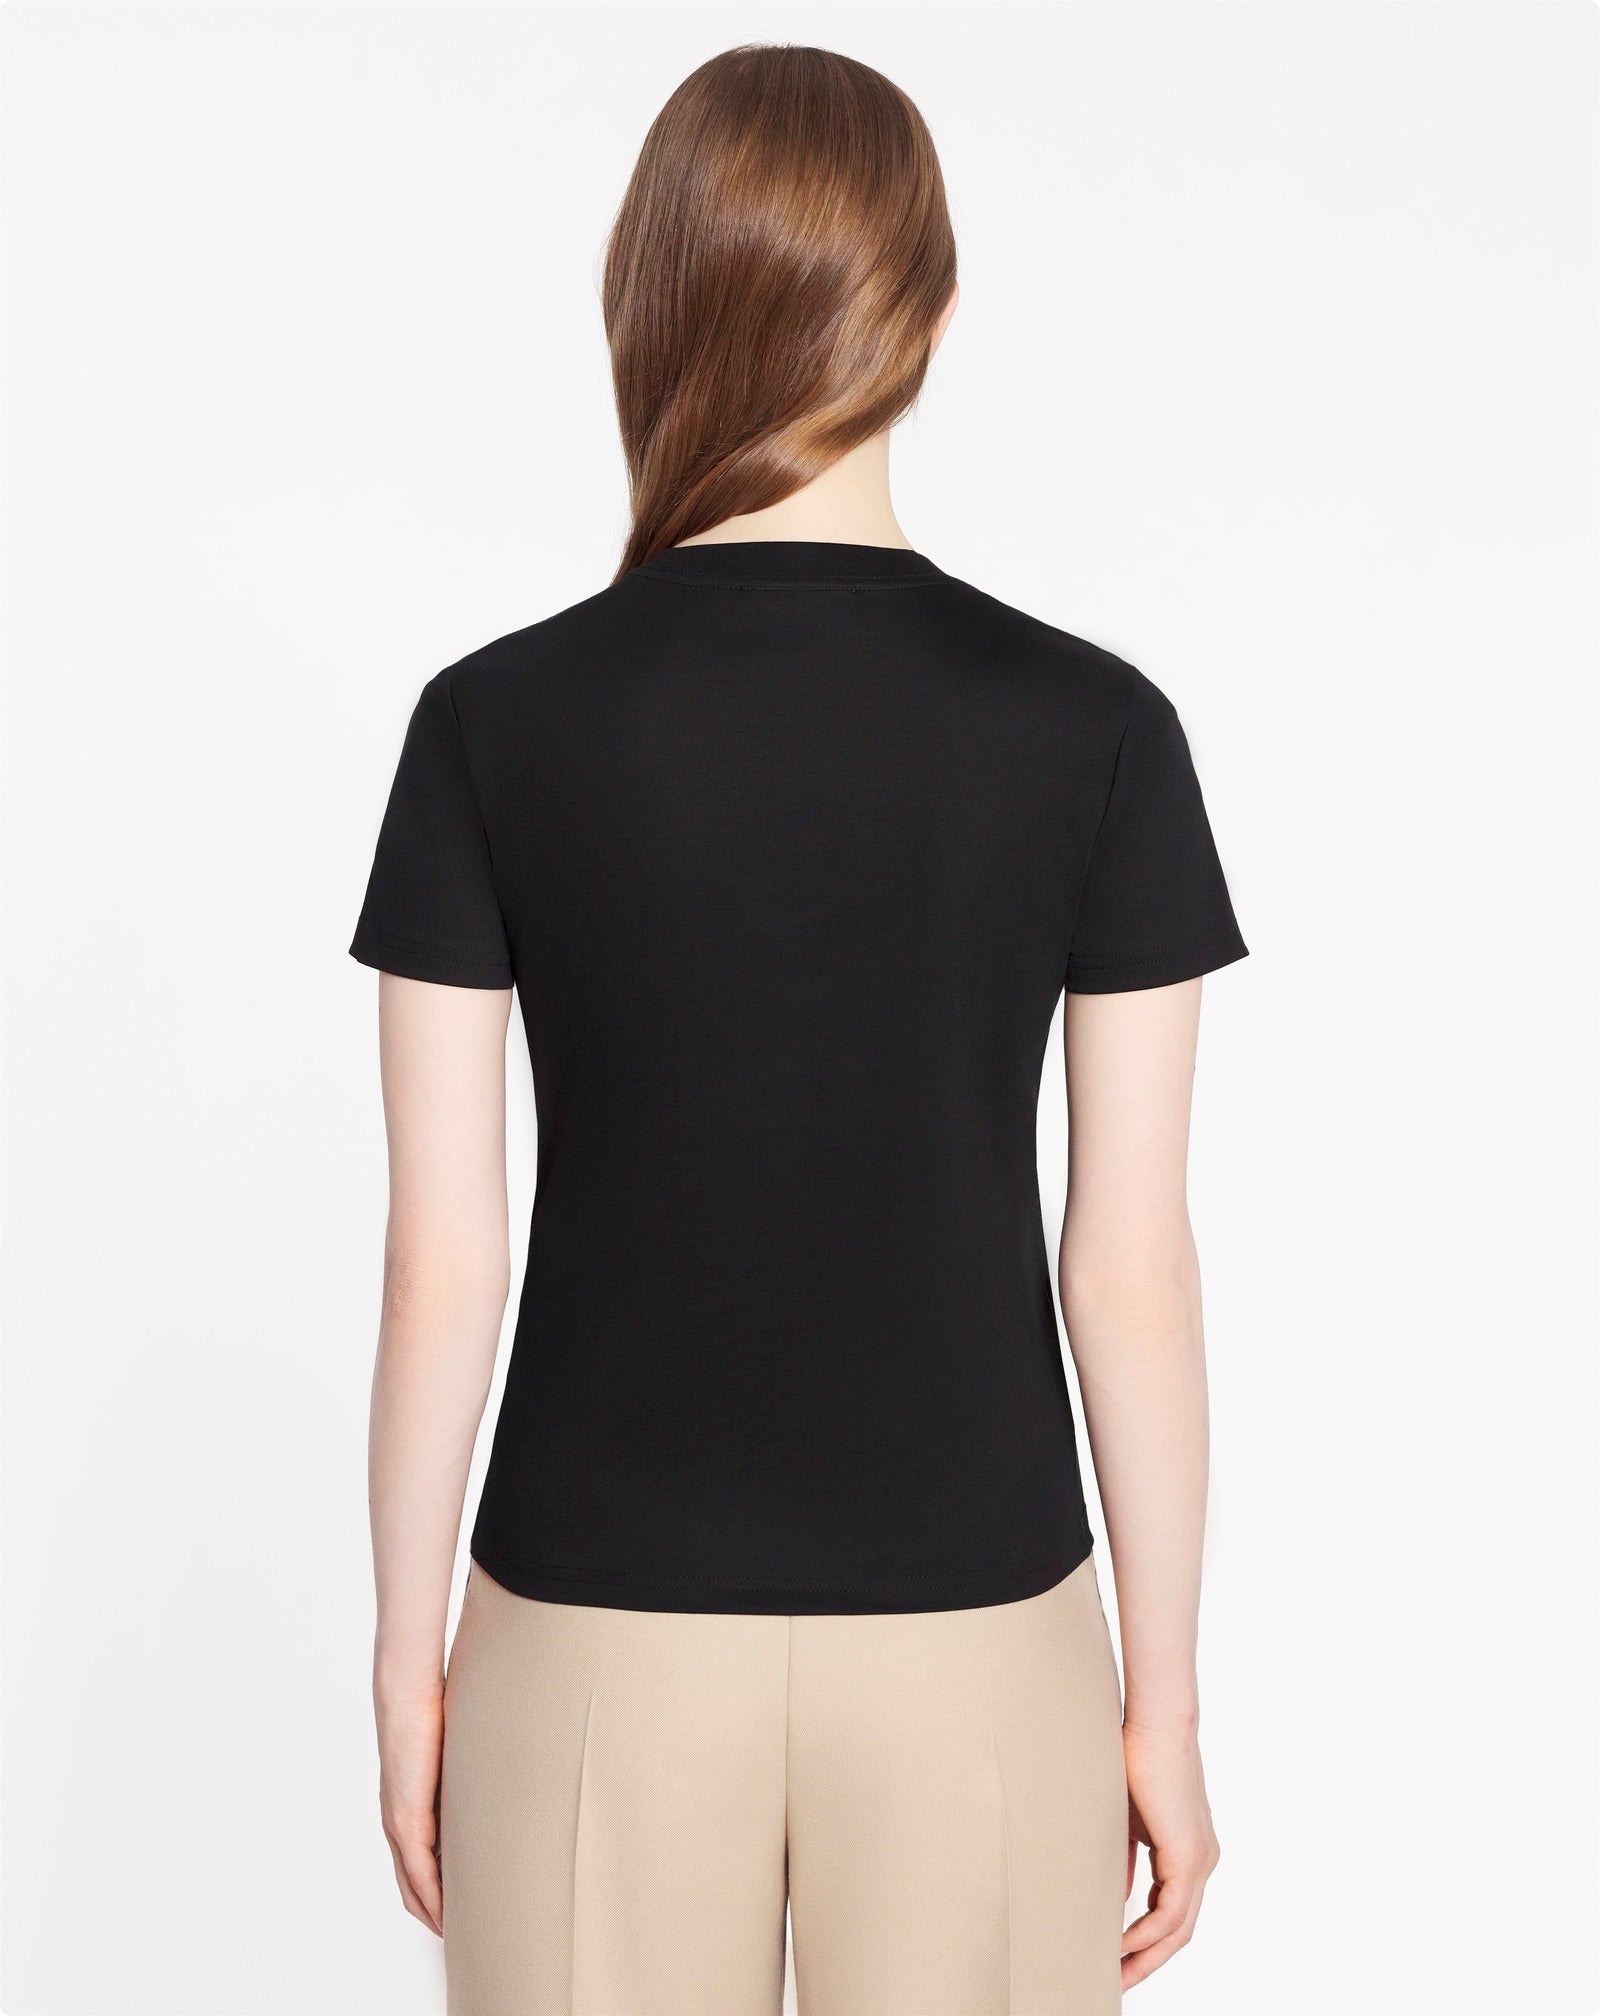 CLASSIC FIT LANVIN EMBROIDERED T-SHIRT - 4